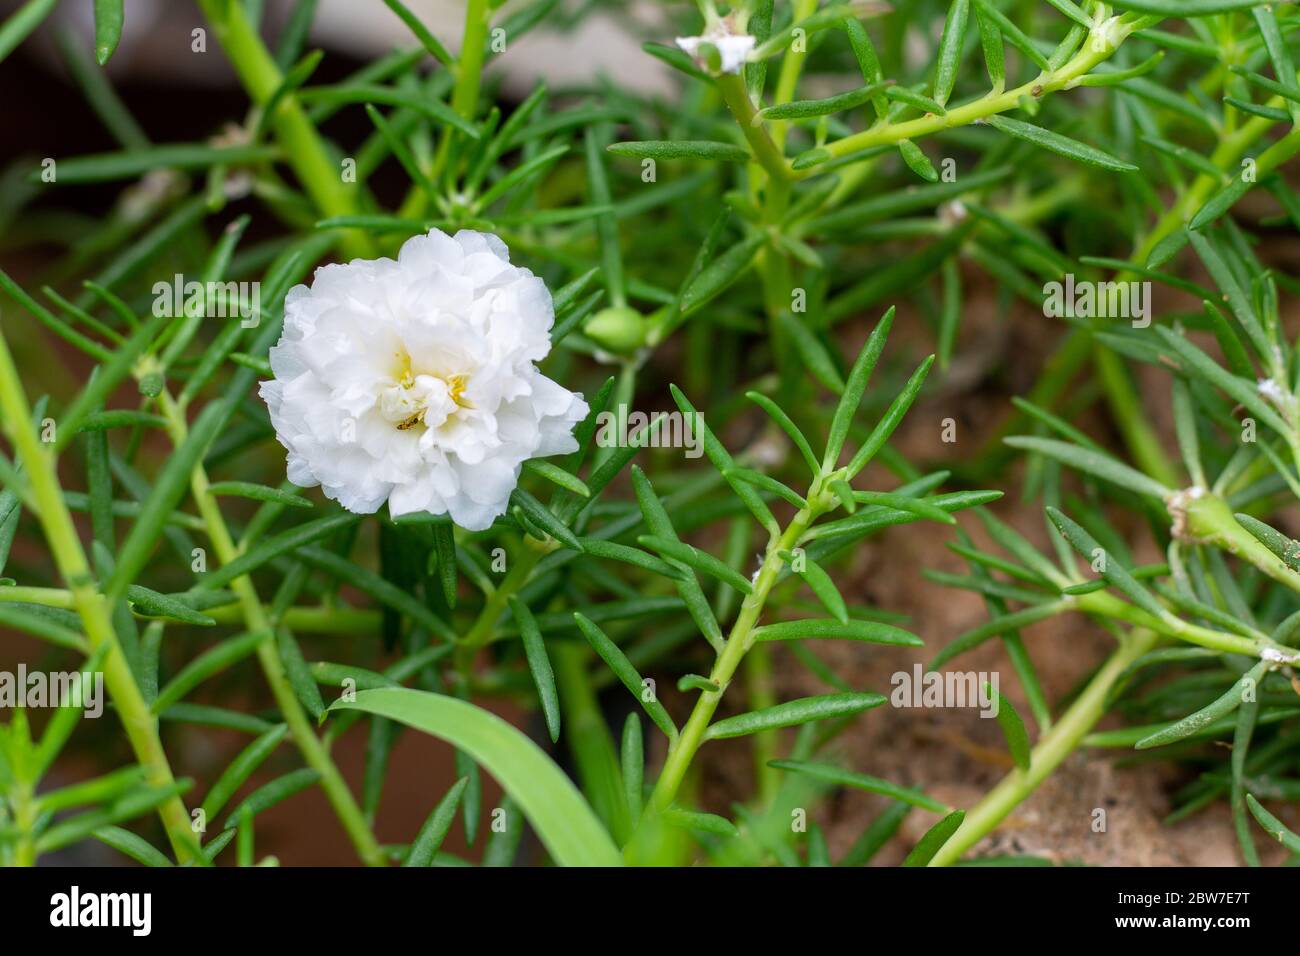 A white common purslane (Portulaca oleracea) flowers in a side view among a set of other white flowers and its juicy leaves. Stock Photo